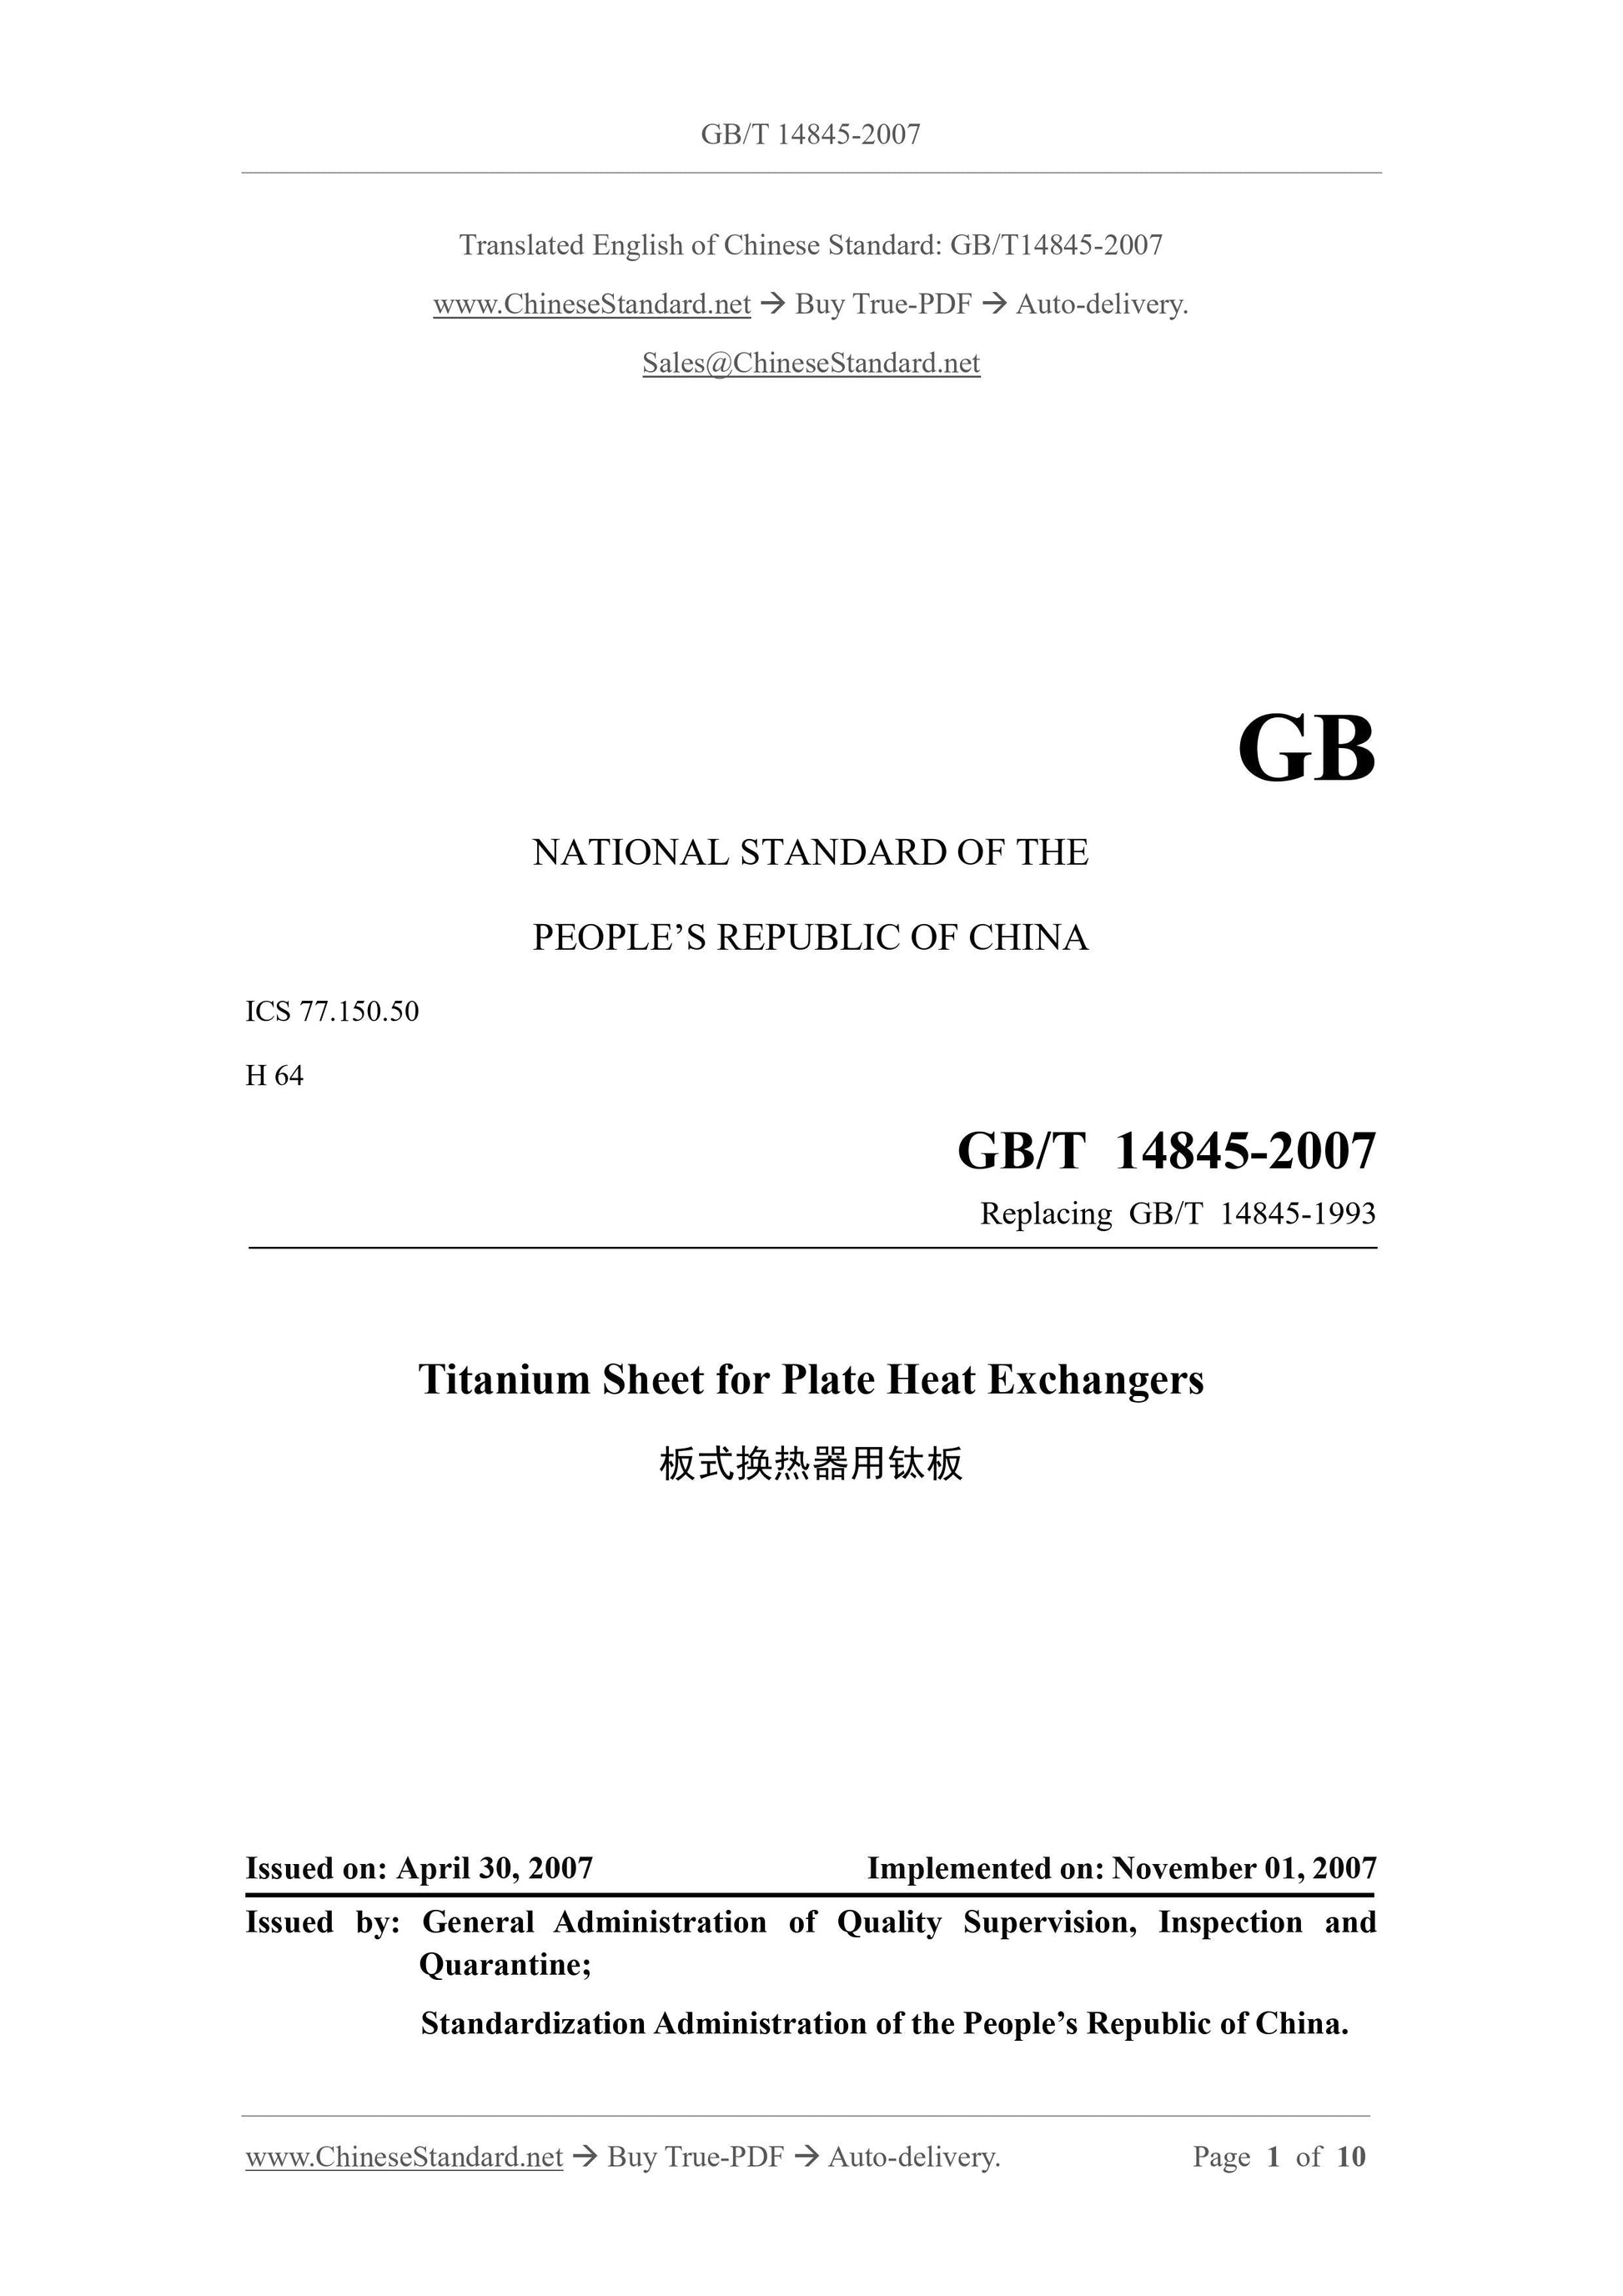 GB/T 14845-2007 Page 1